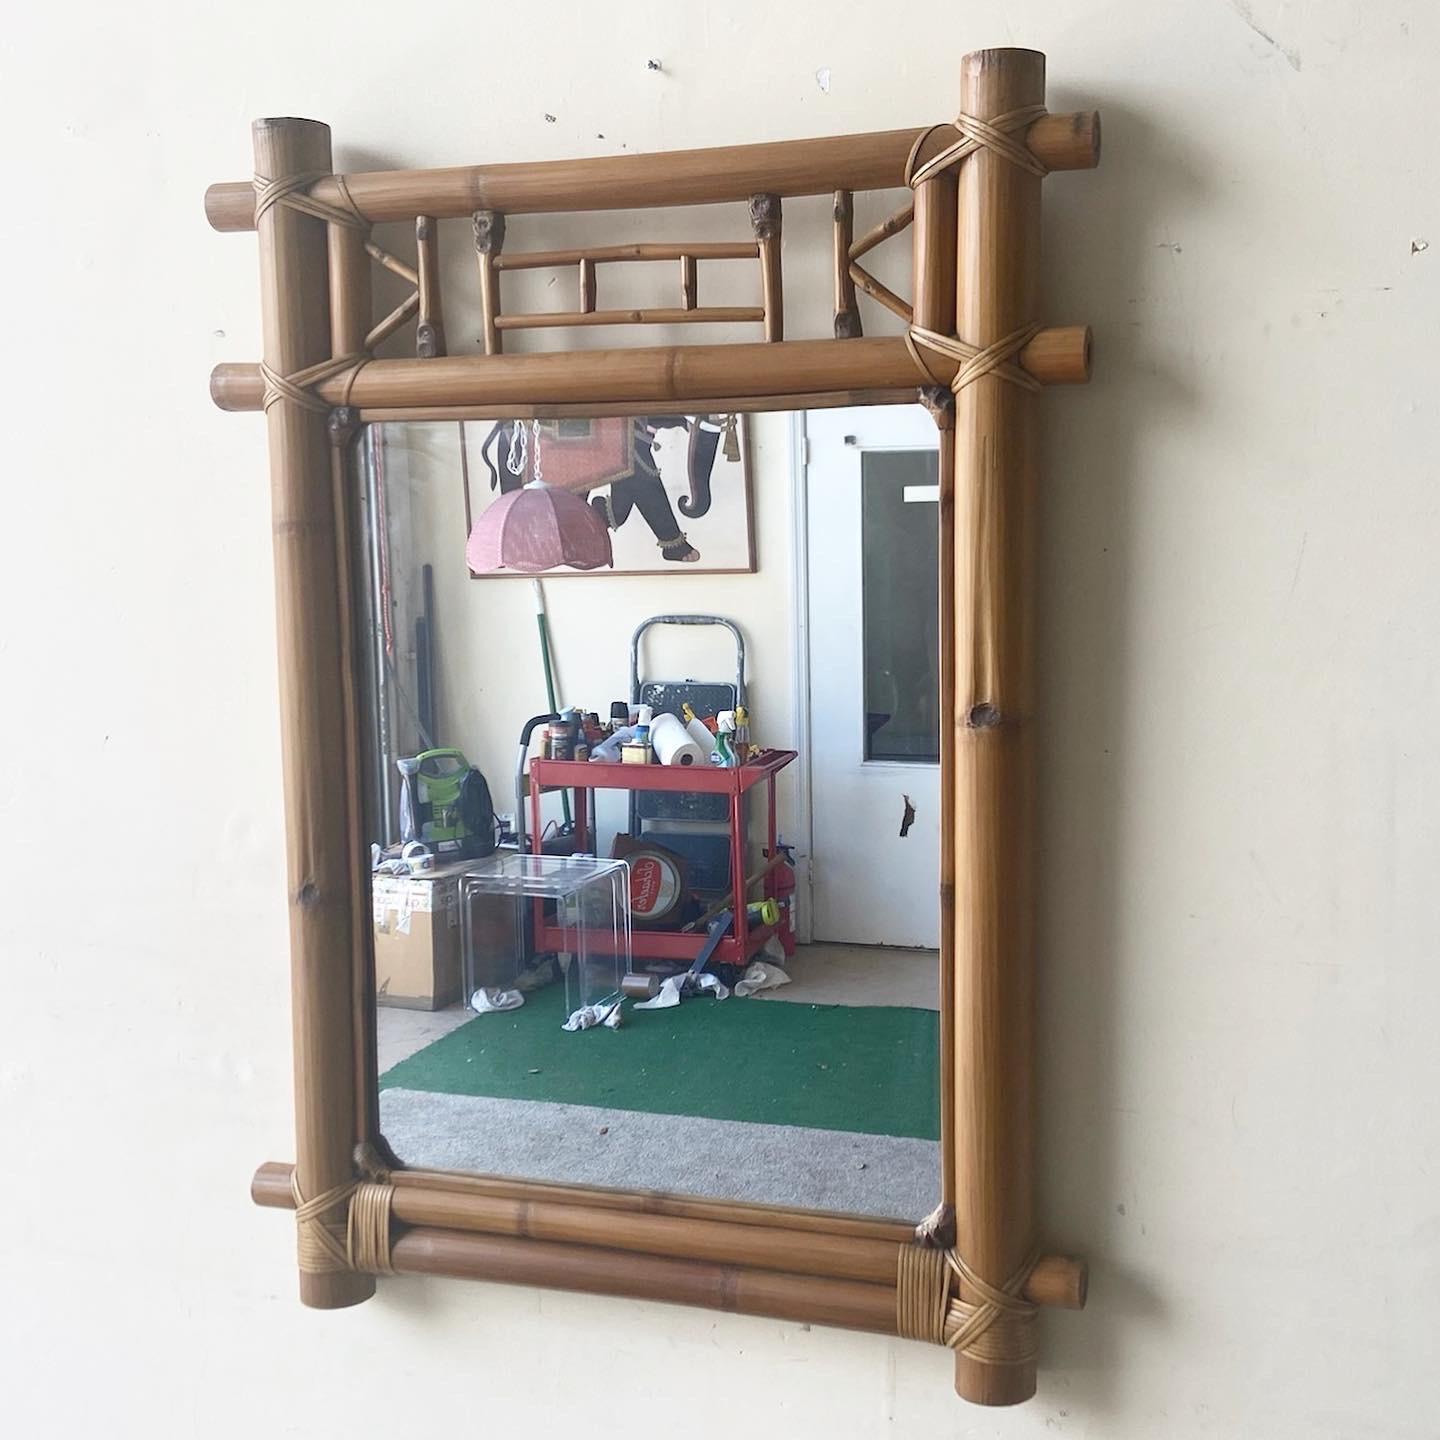 Exceptional boho chic mirror. Features a bamboo frame and a jungly vibe.